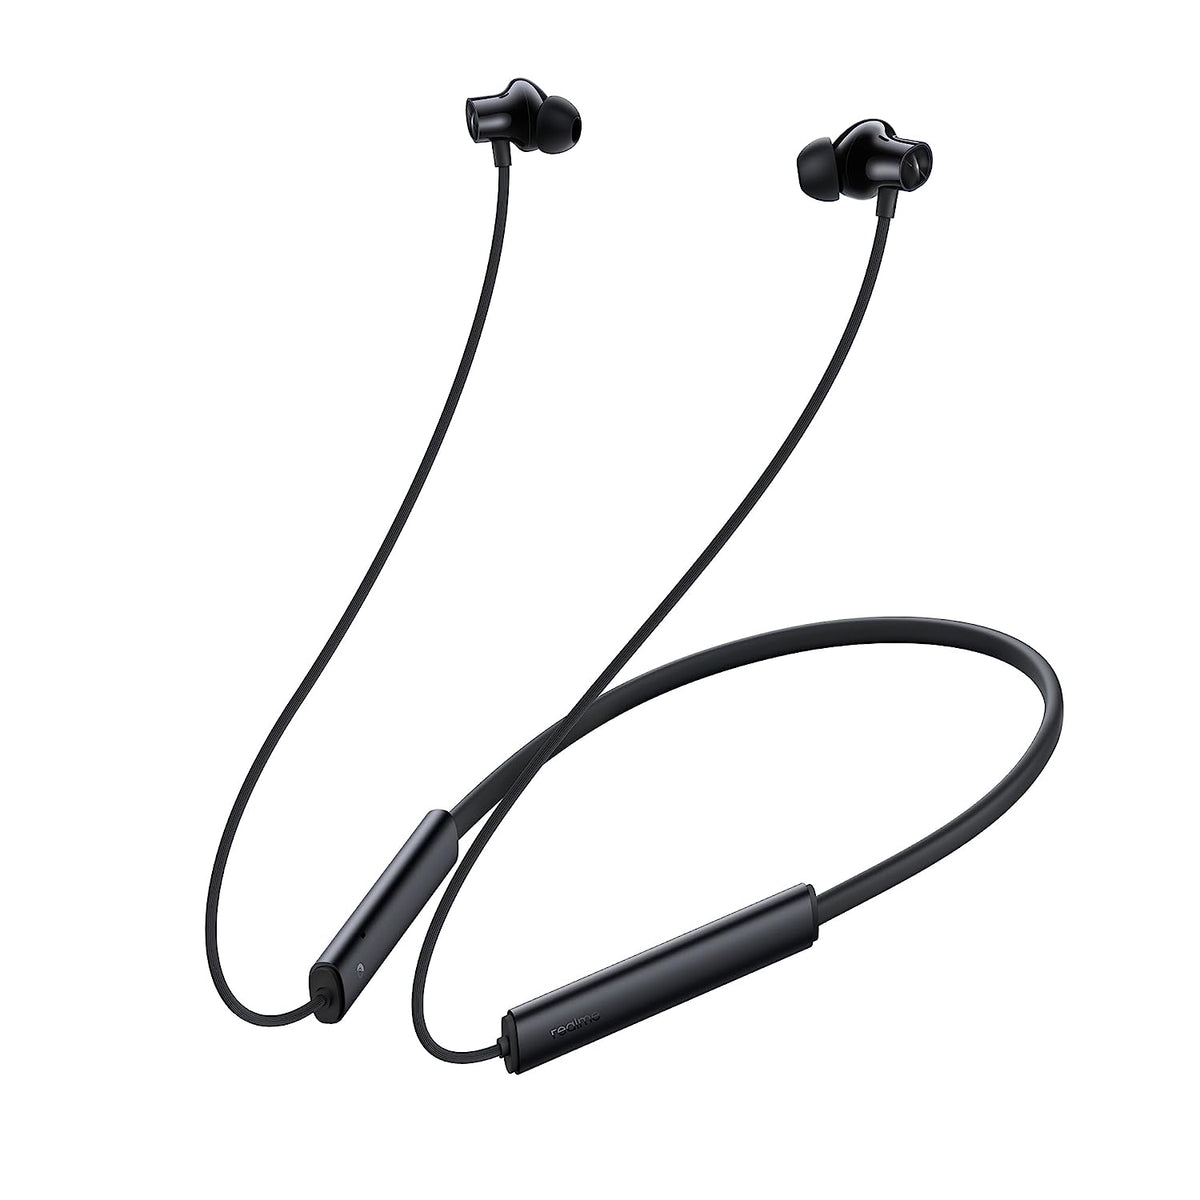 Realme Buds Wireless 3 in-Ear Bluetooth Headphones,30dB ANC,Spatial Audio,13.6mm Dynamic Bass Driver,Upto 40 HrsPlayback,Fast Charging,45ms Low Latency for Gaming,Dual Device Connection-Vitality White